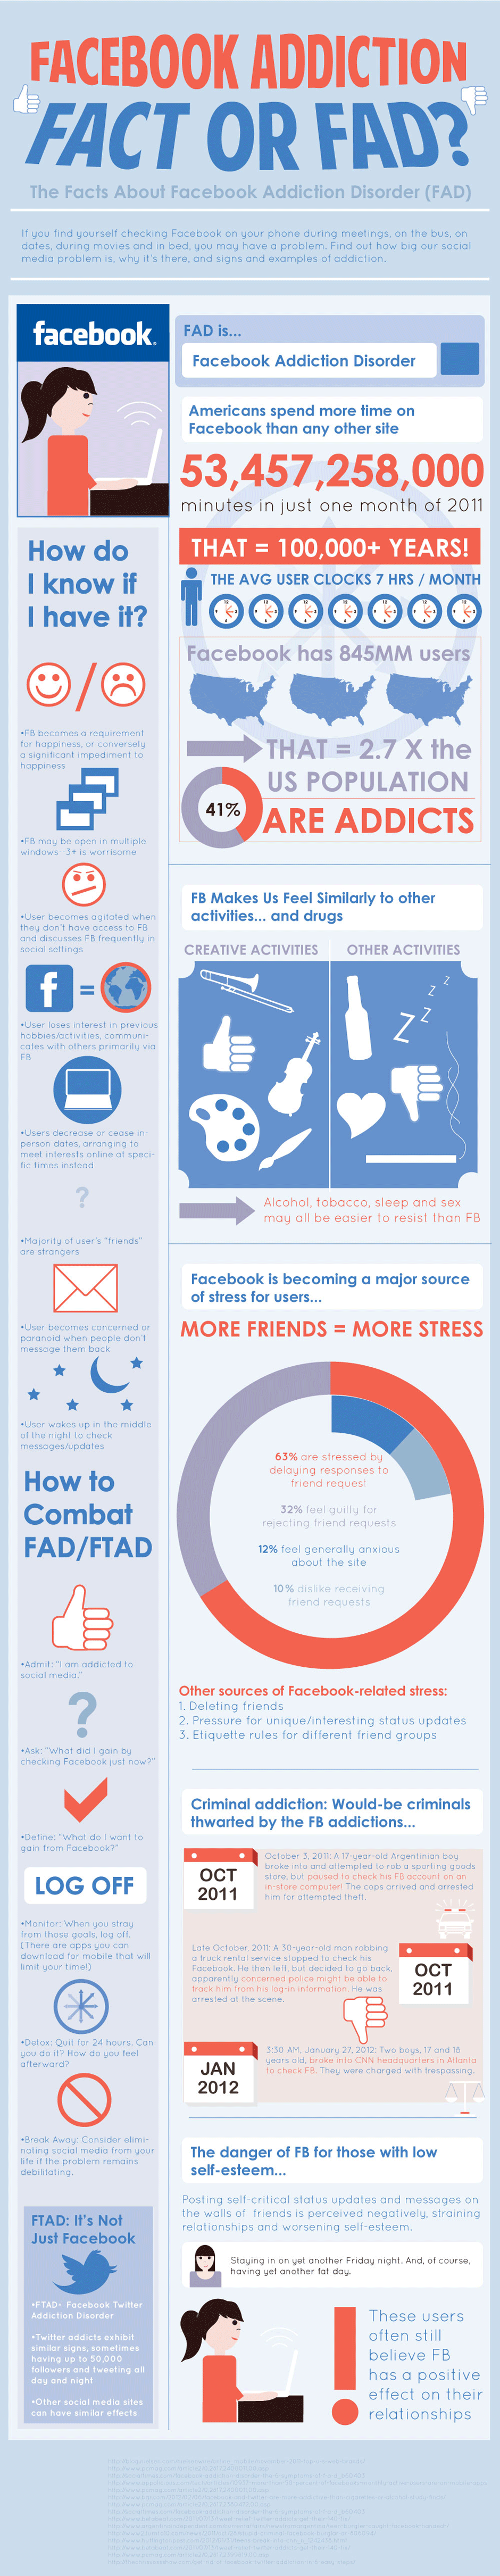 Facebook-Addiction-Fact-Or-Fad-infographic